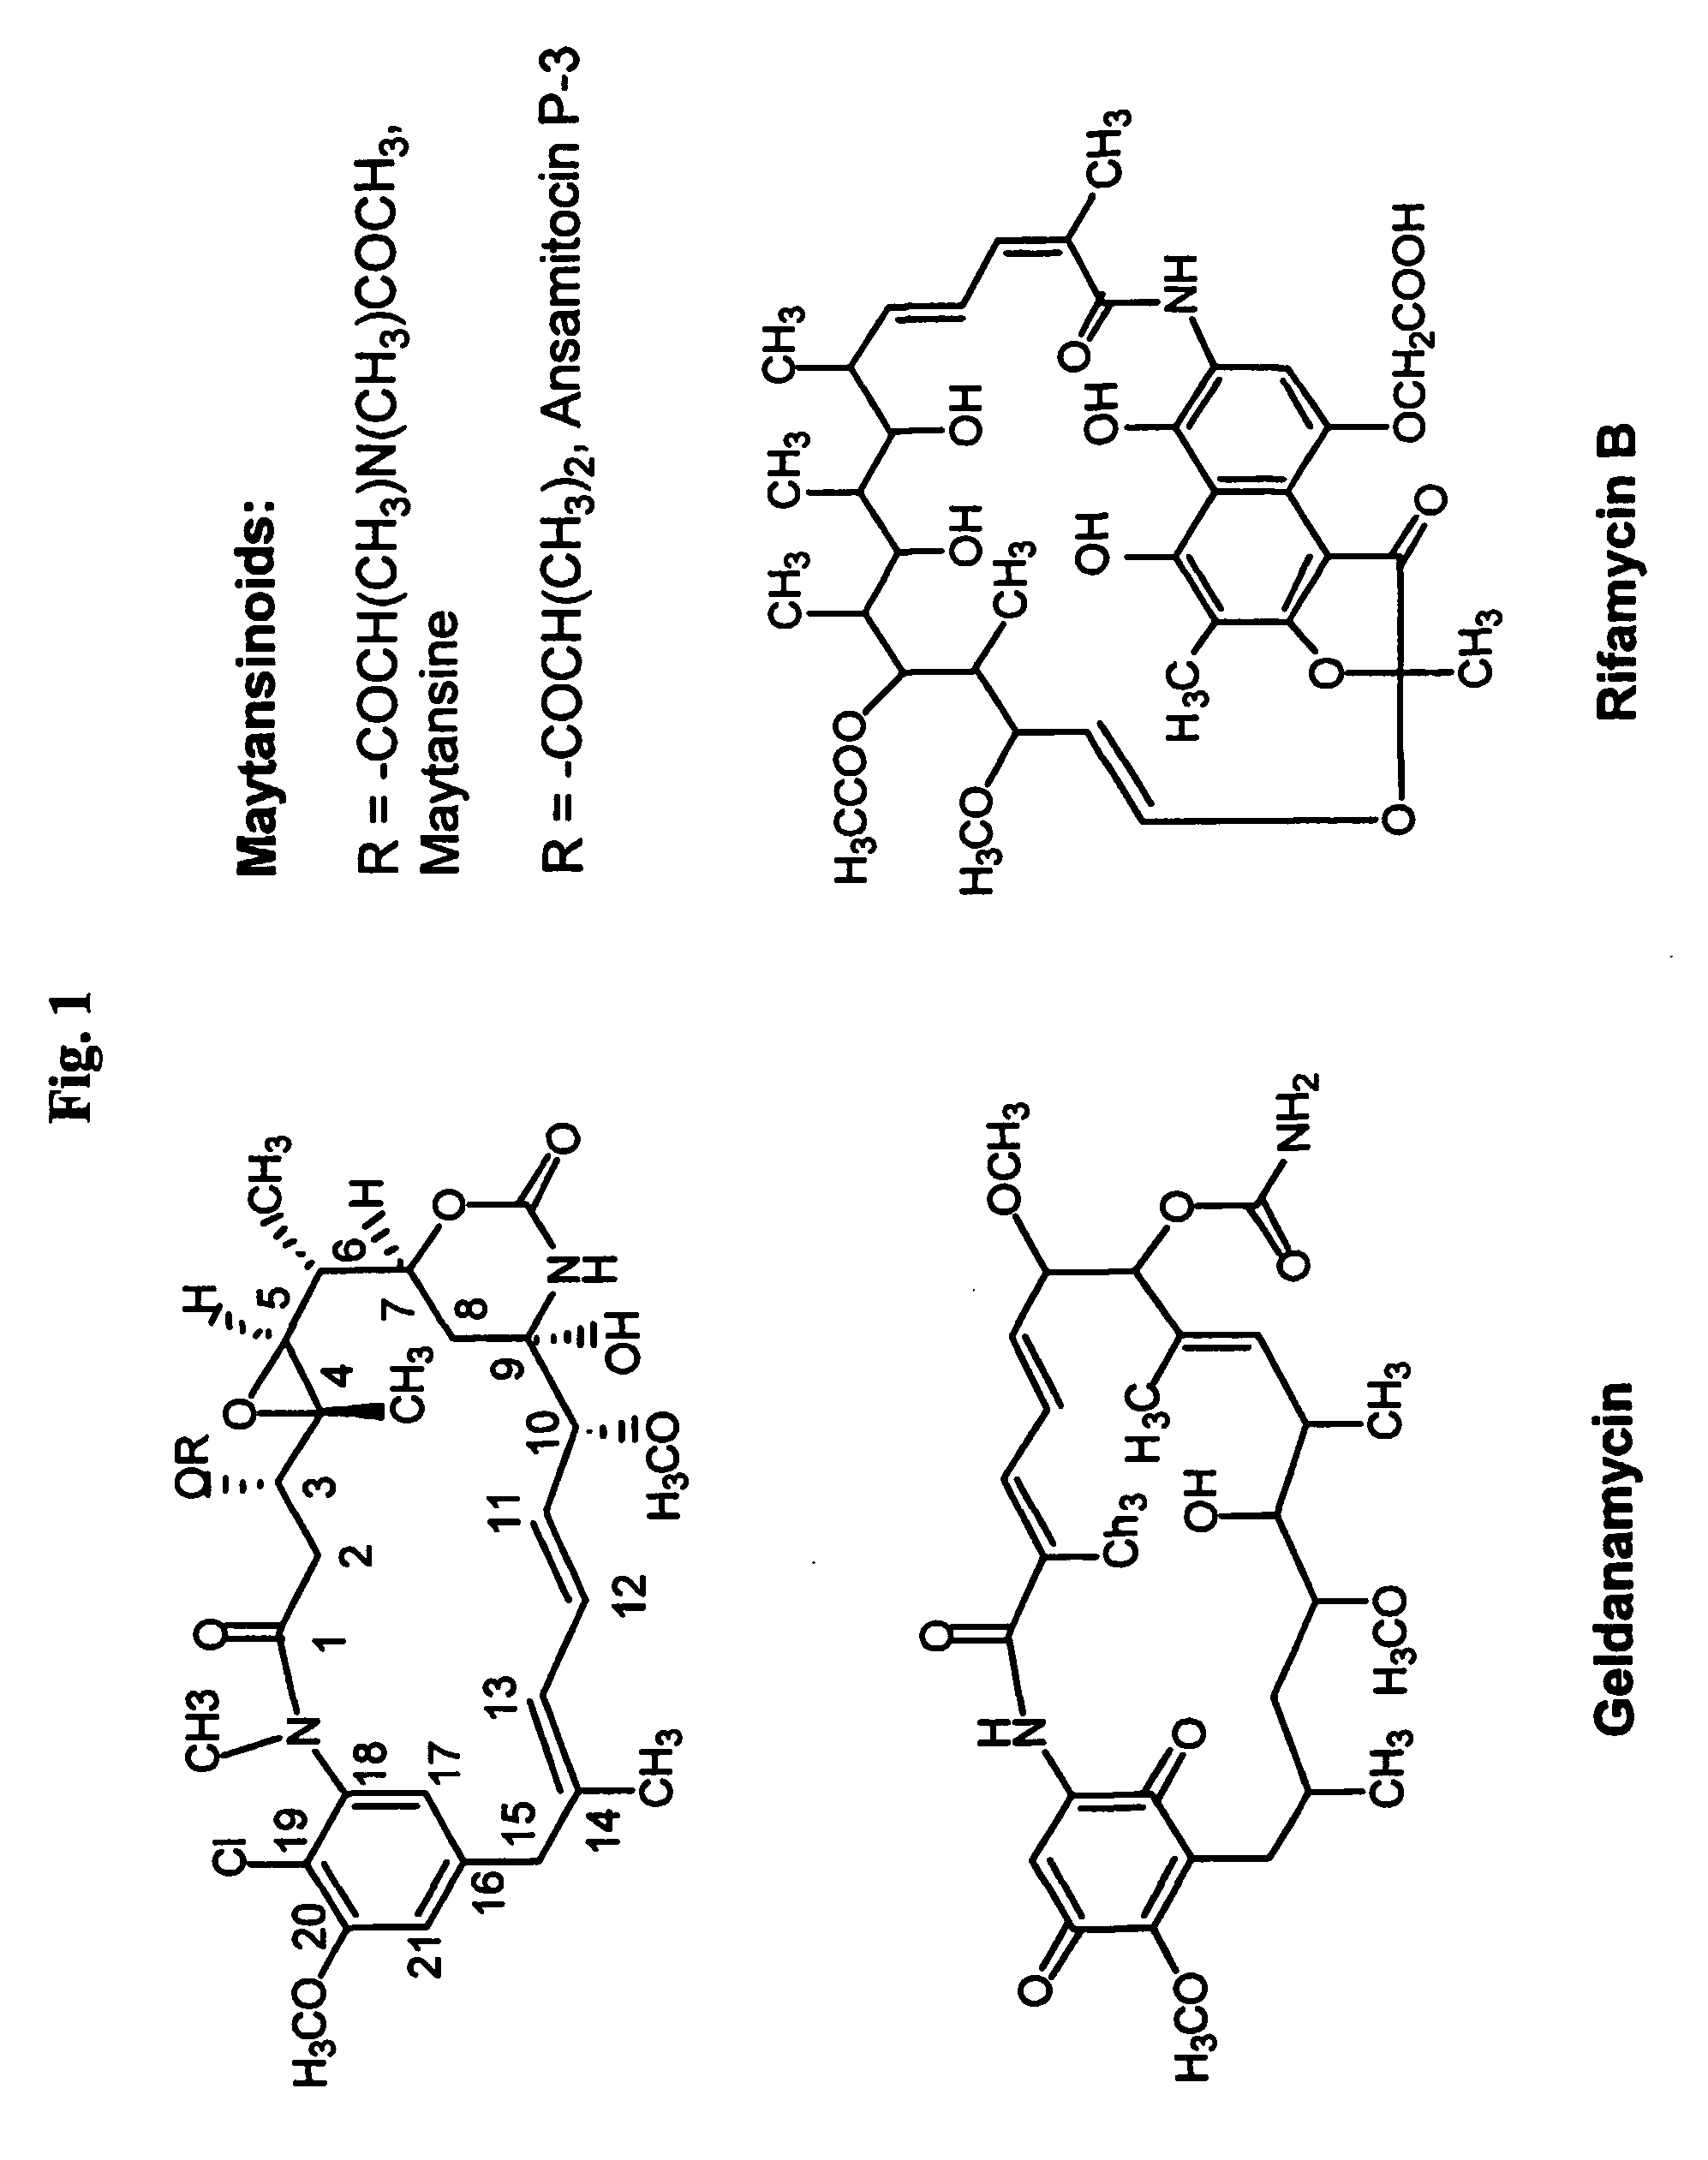 Biosynthetic gene cluster for the maytansinoid antitumor agent ansamitocin